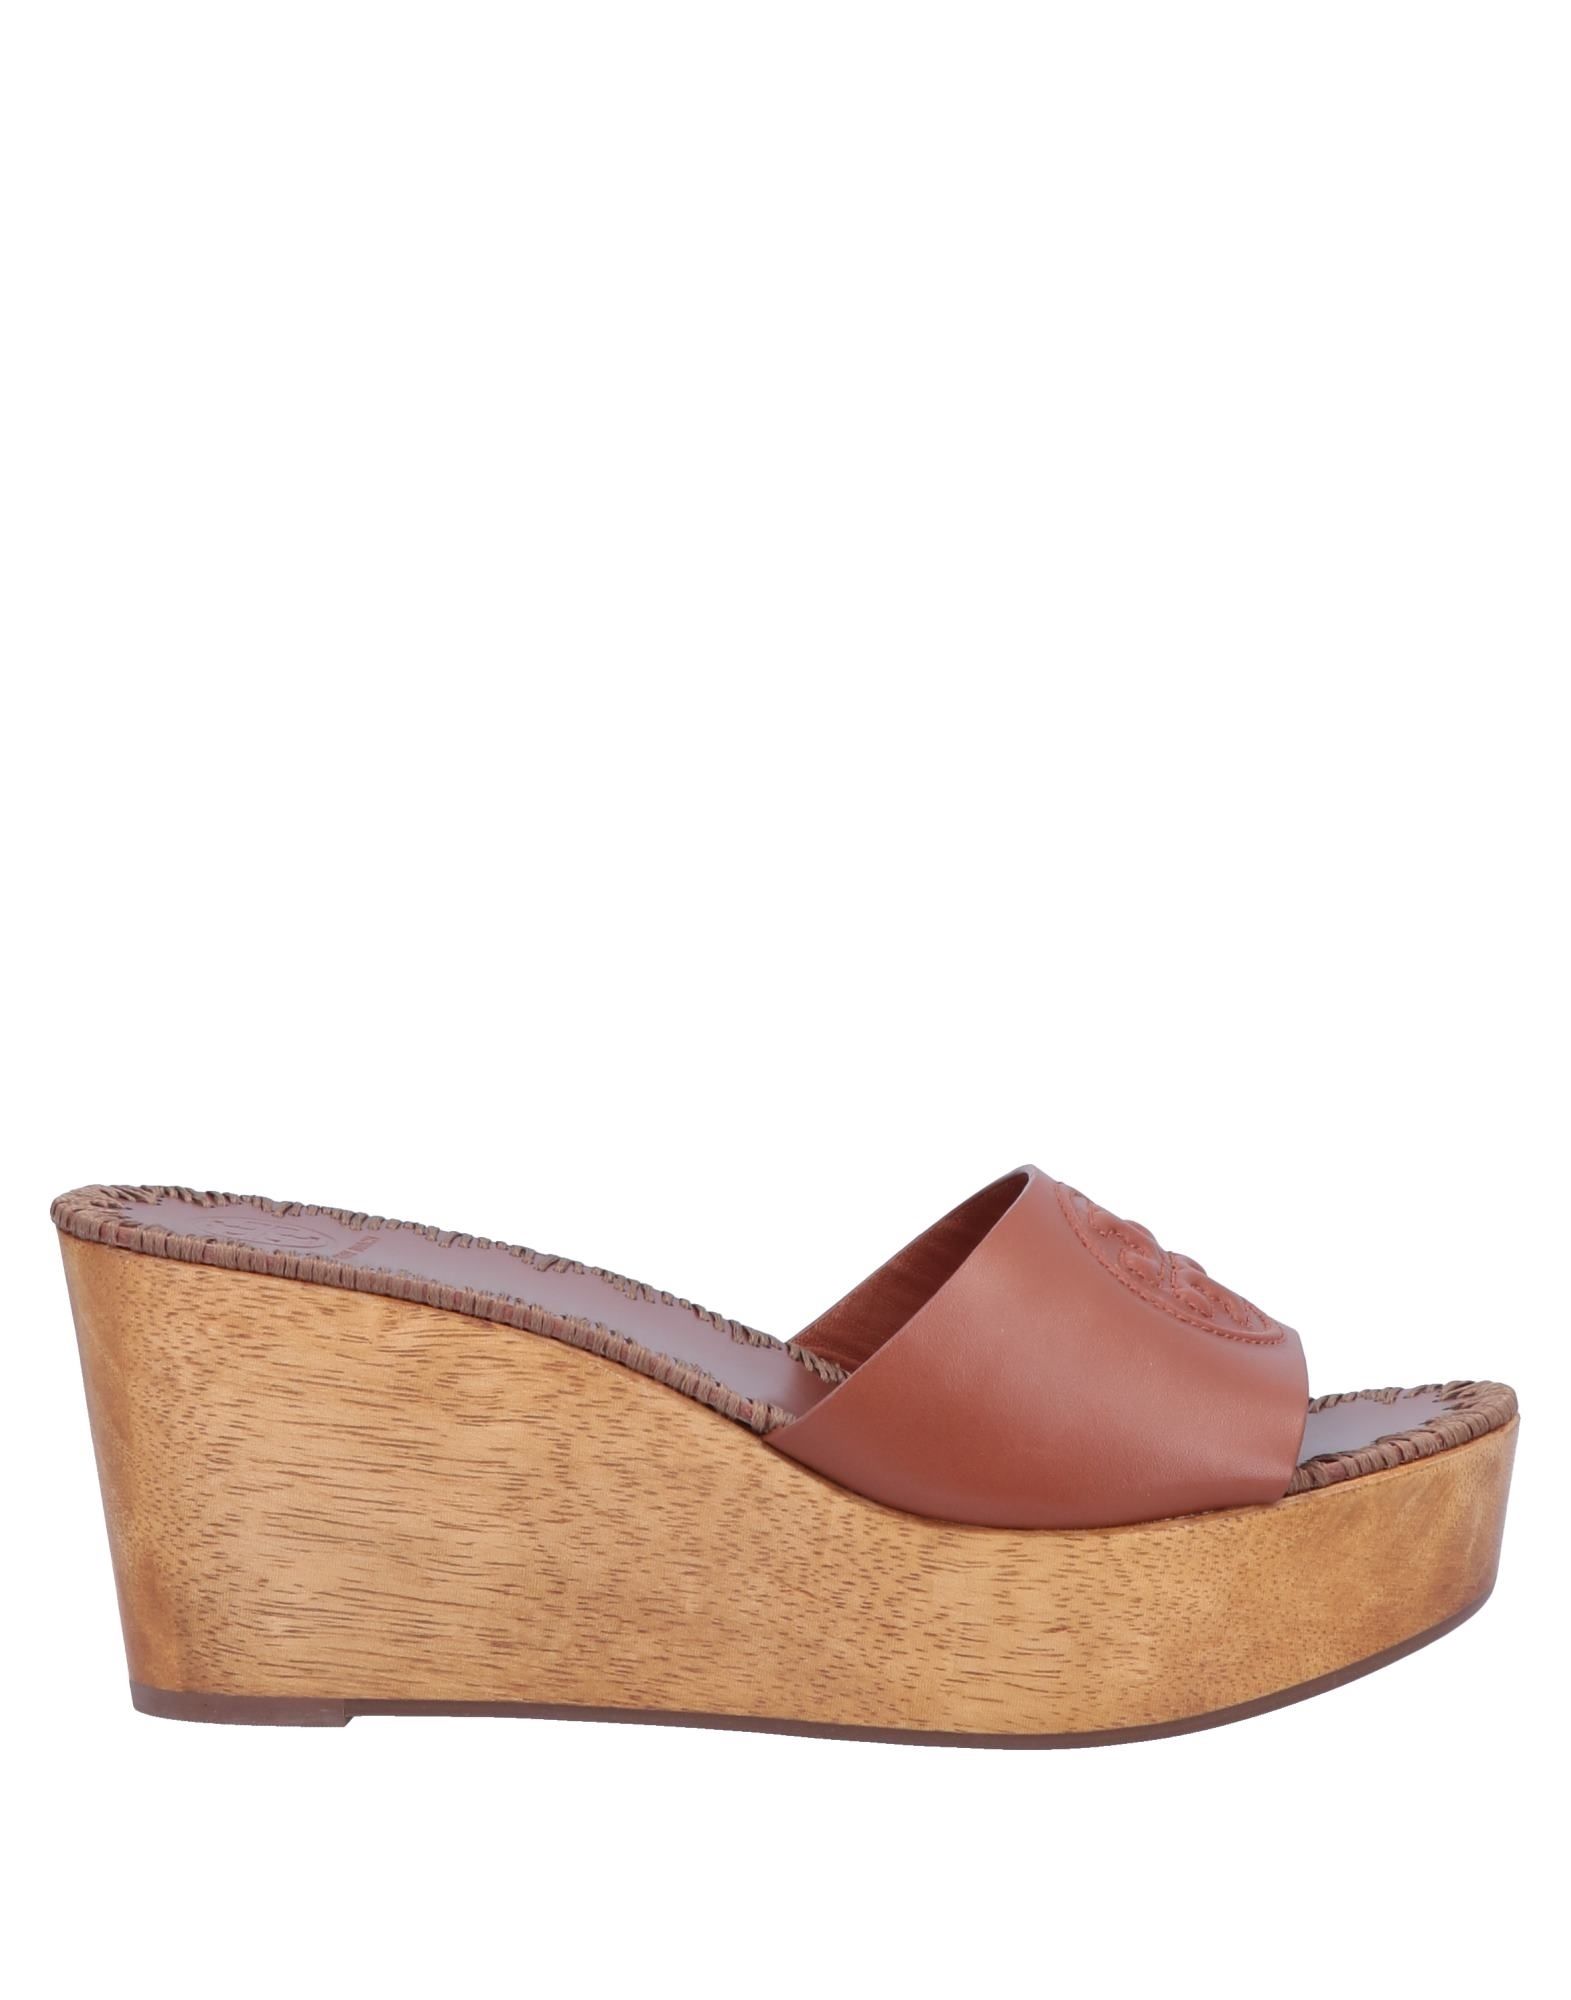 tory burch wooden wedge